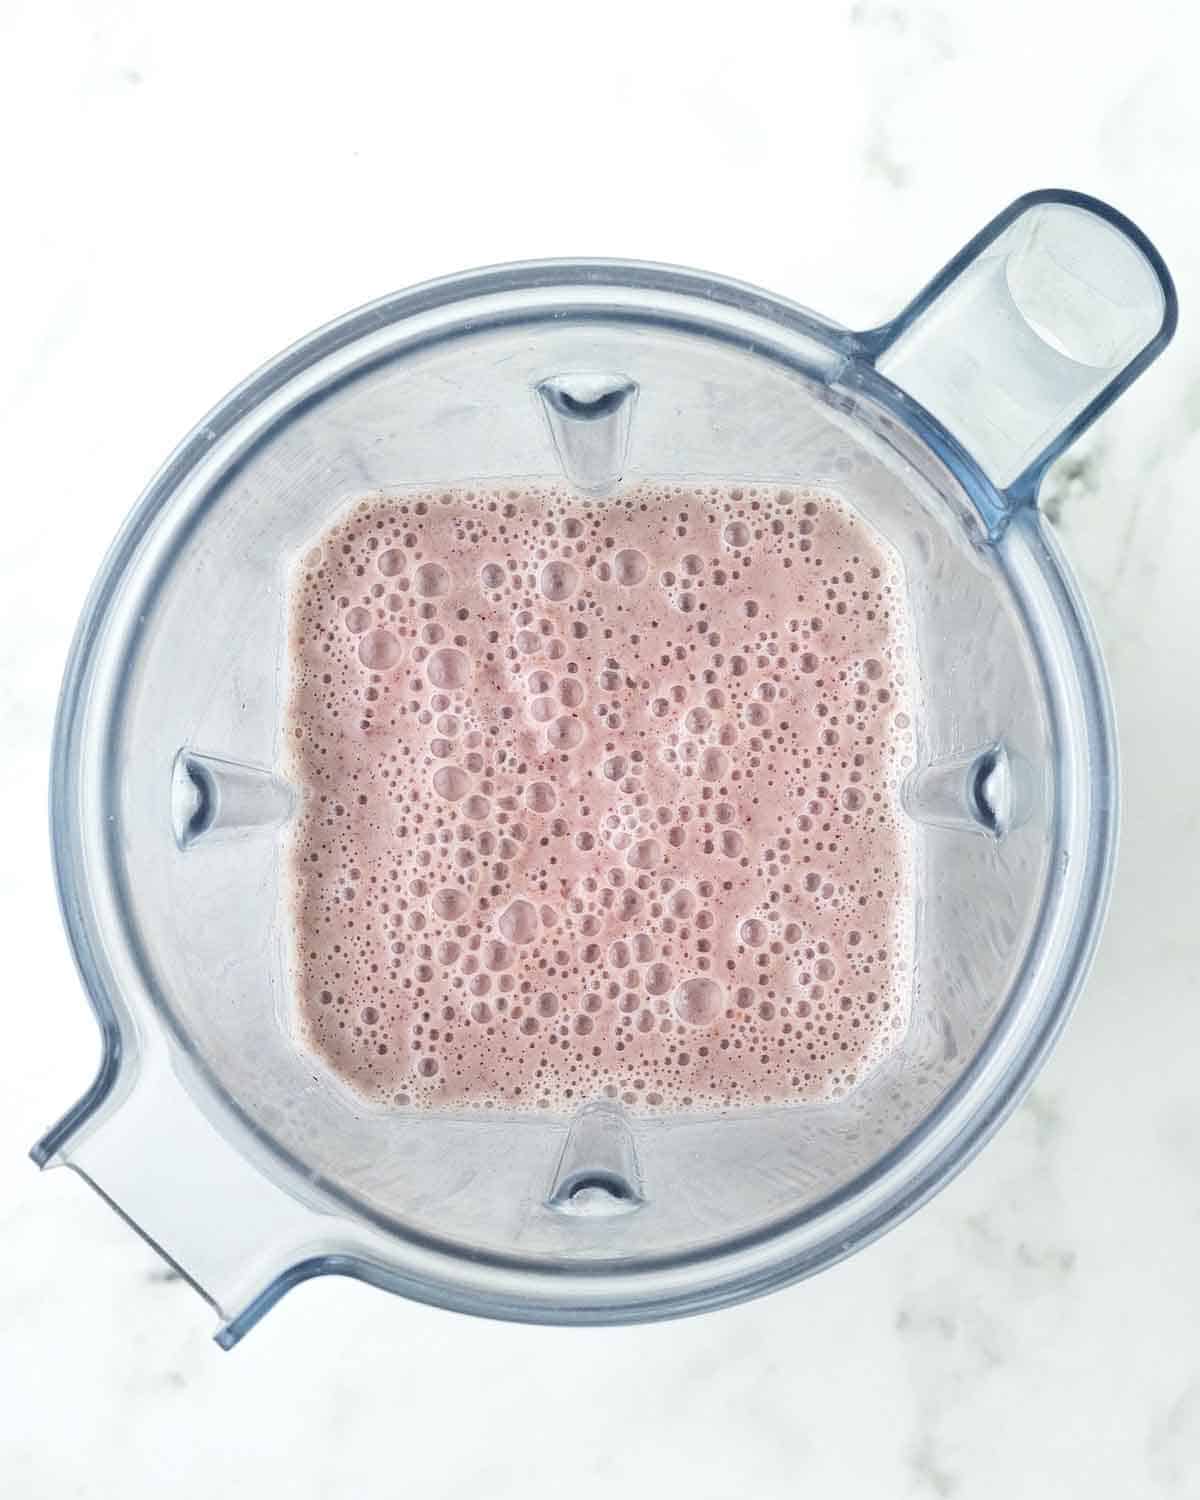 An overhead image of freshly blended cranberry smoothie in a blender canister.